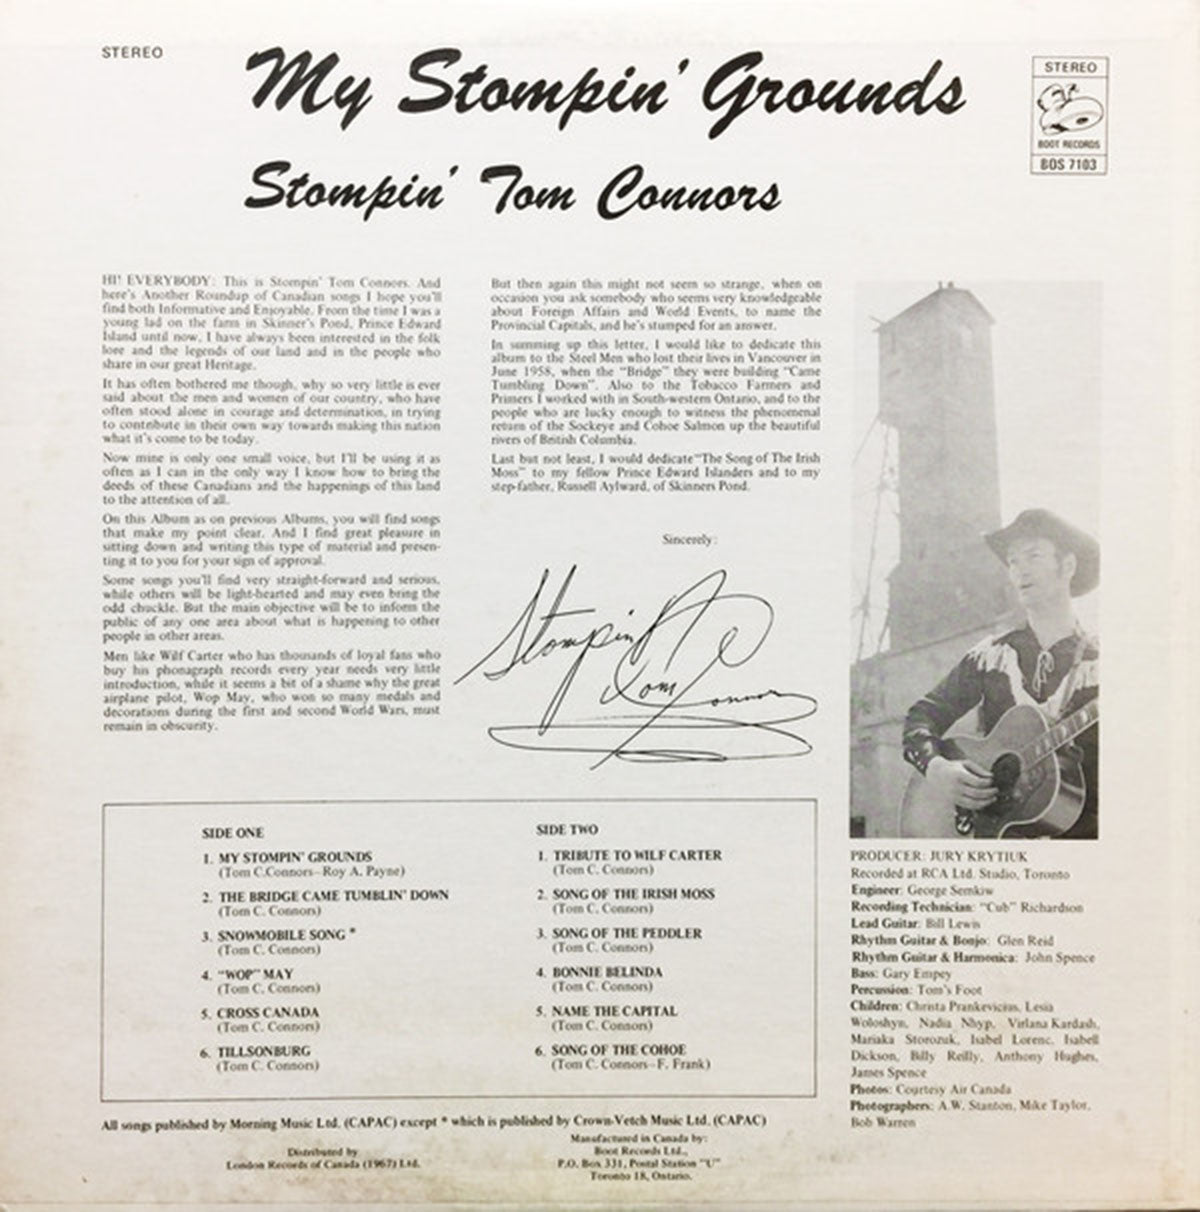 Stompin' Tom Connors – My Stompin' Grounds